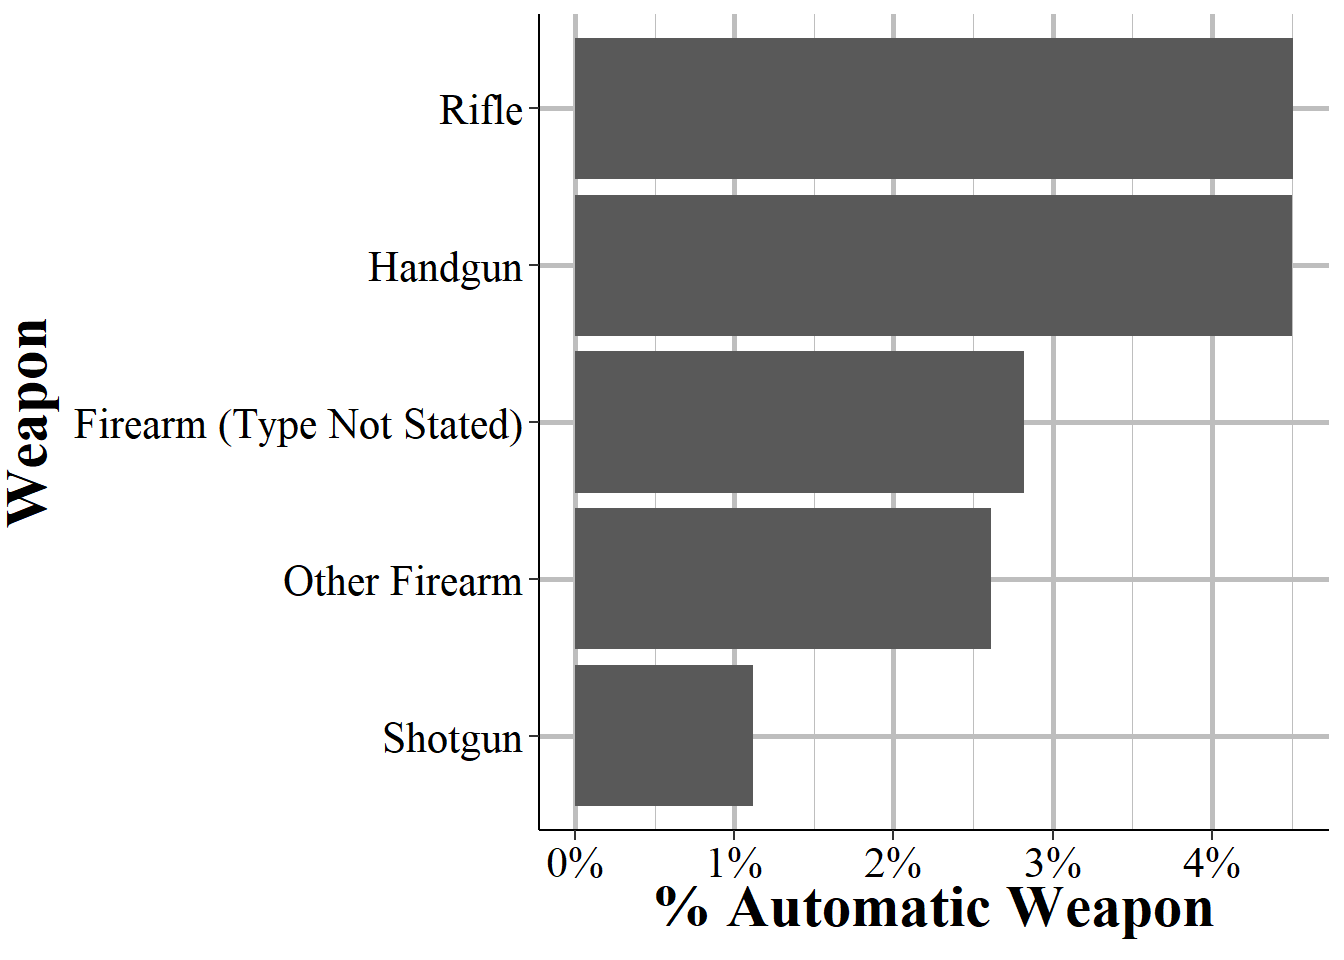 The percent of firearms used that were fully automatic, for all offenses in 2019.